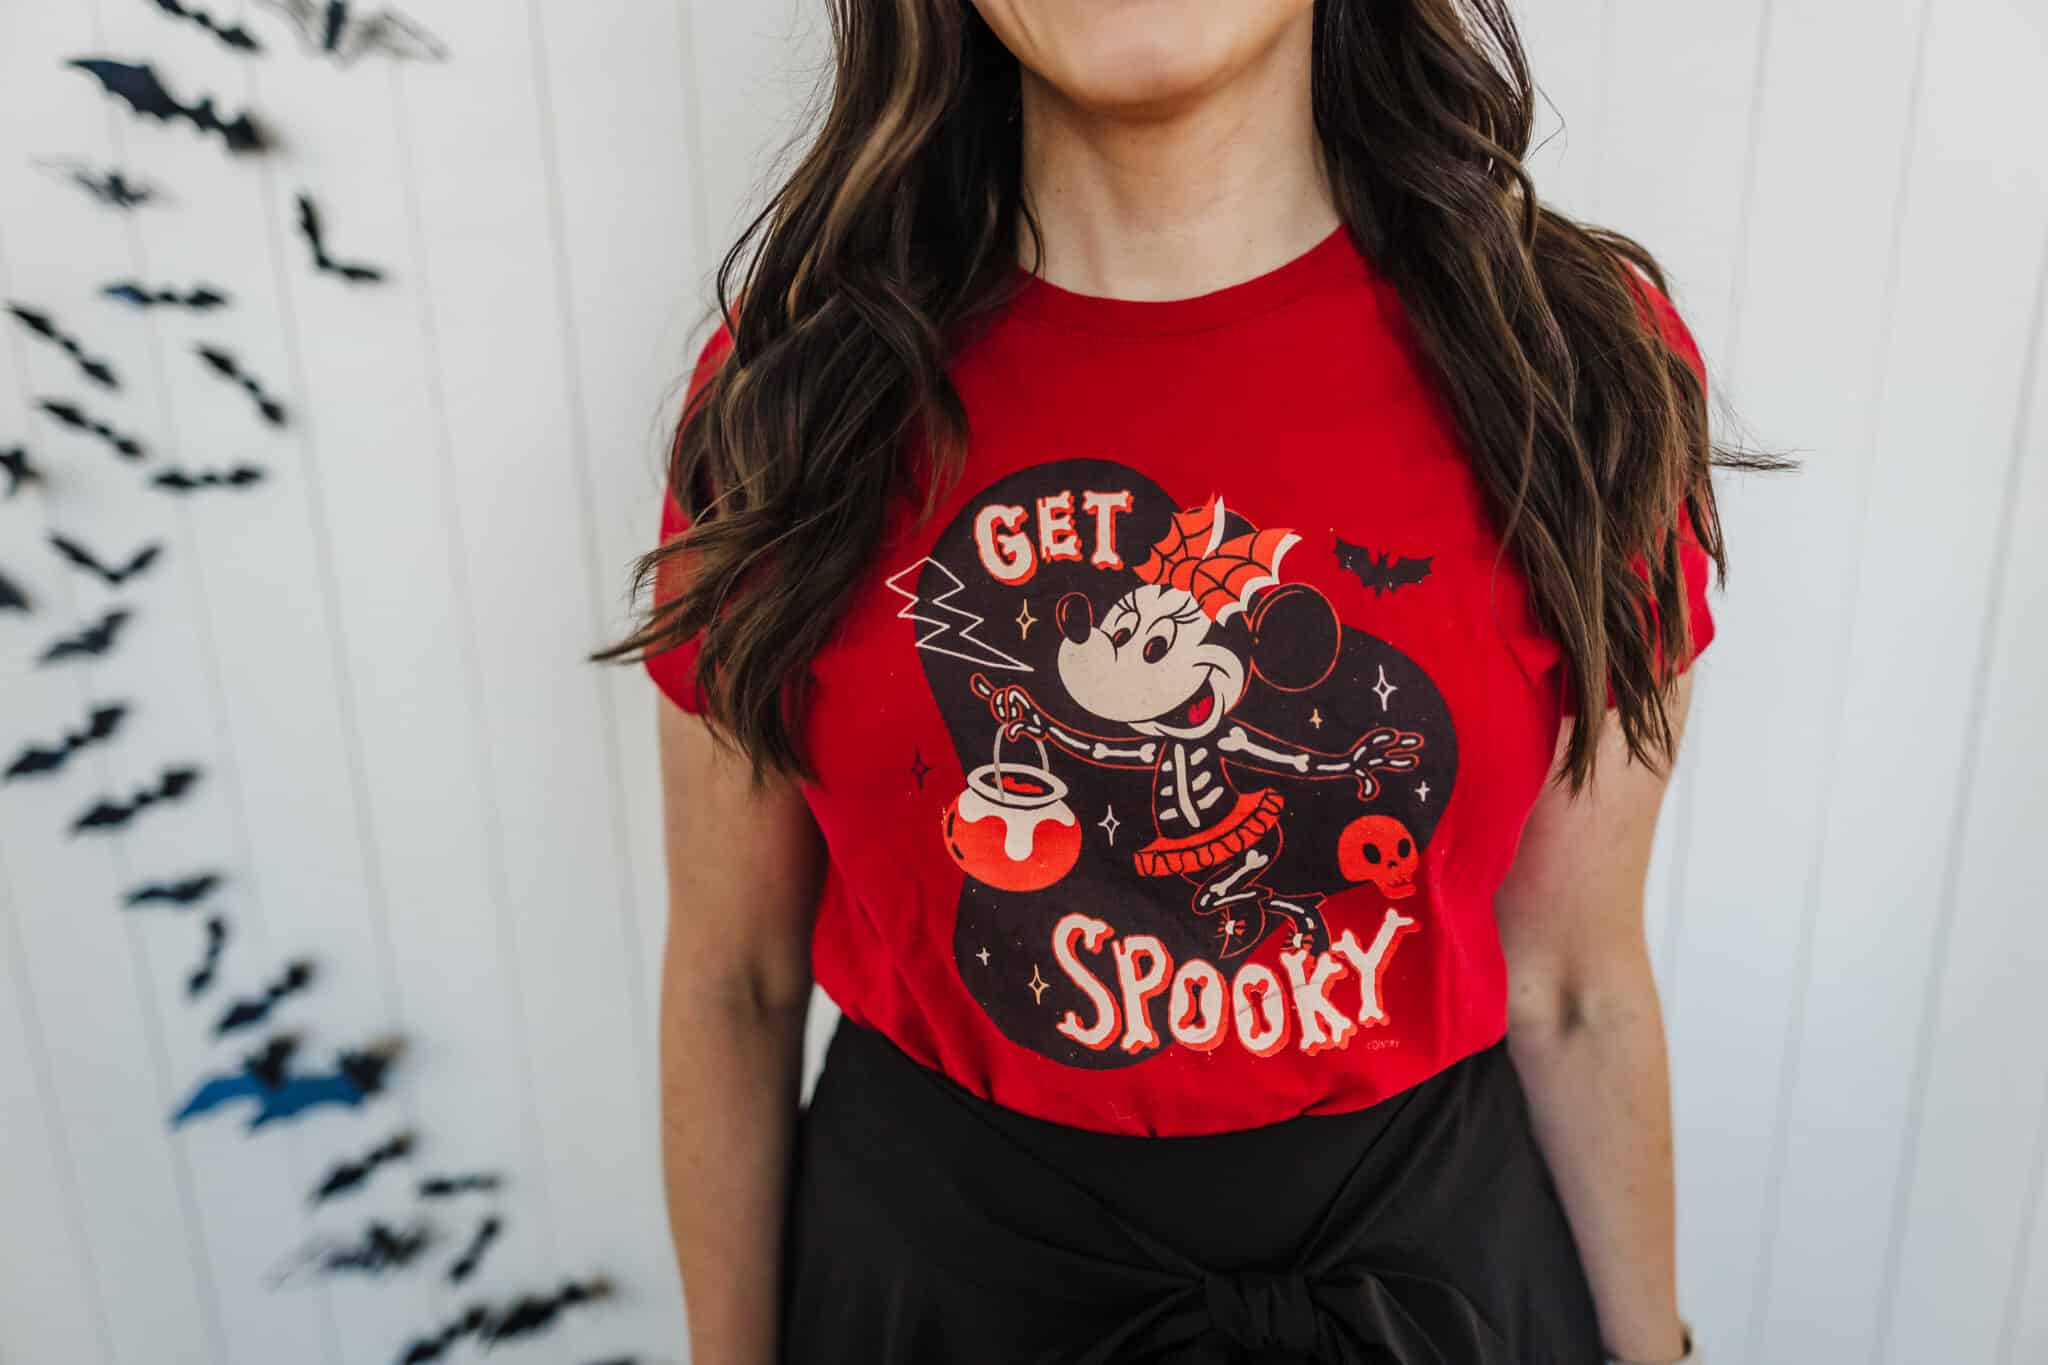 Disney Halloween Shirts: Where to Find Them + Tons of Cute Options